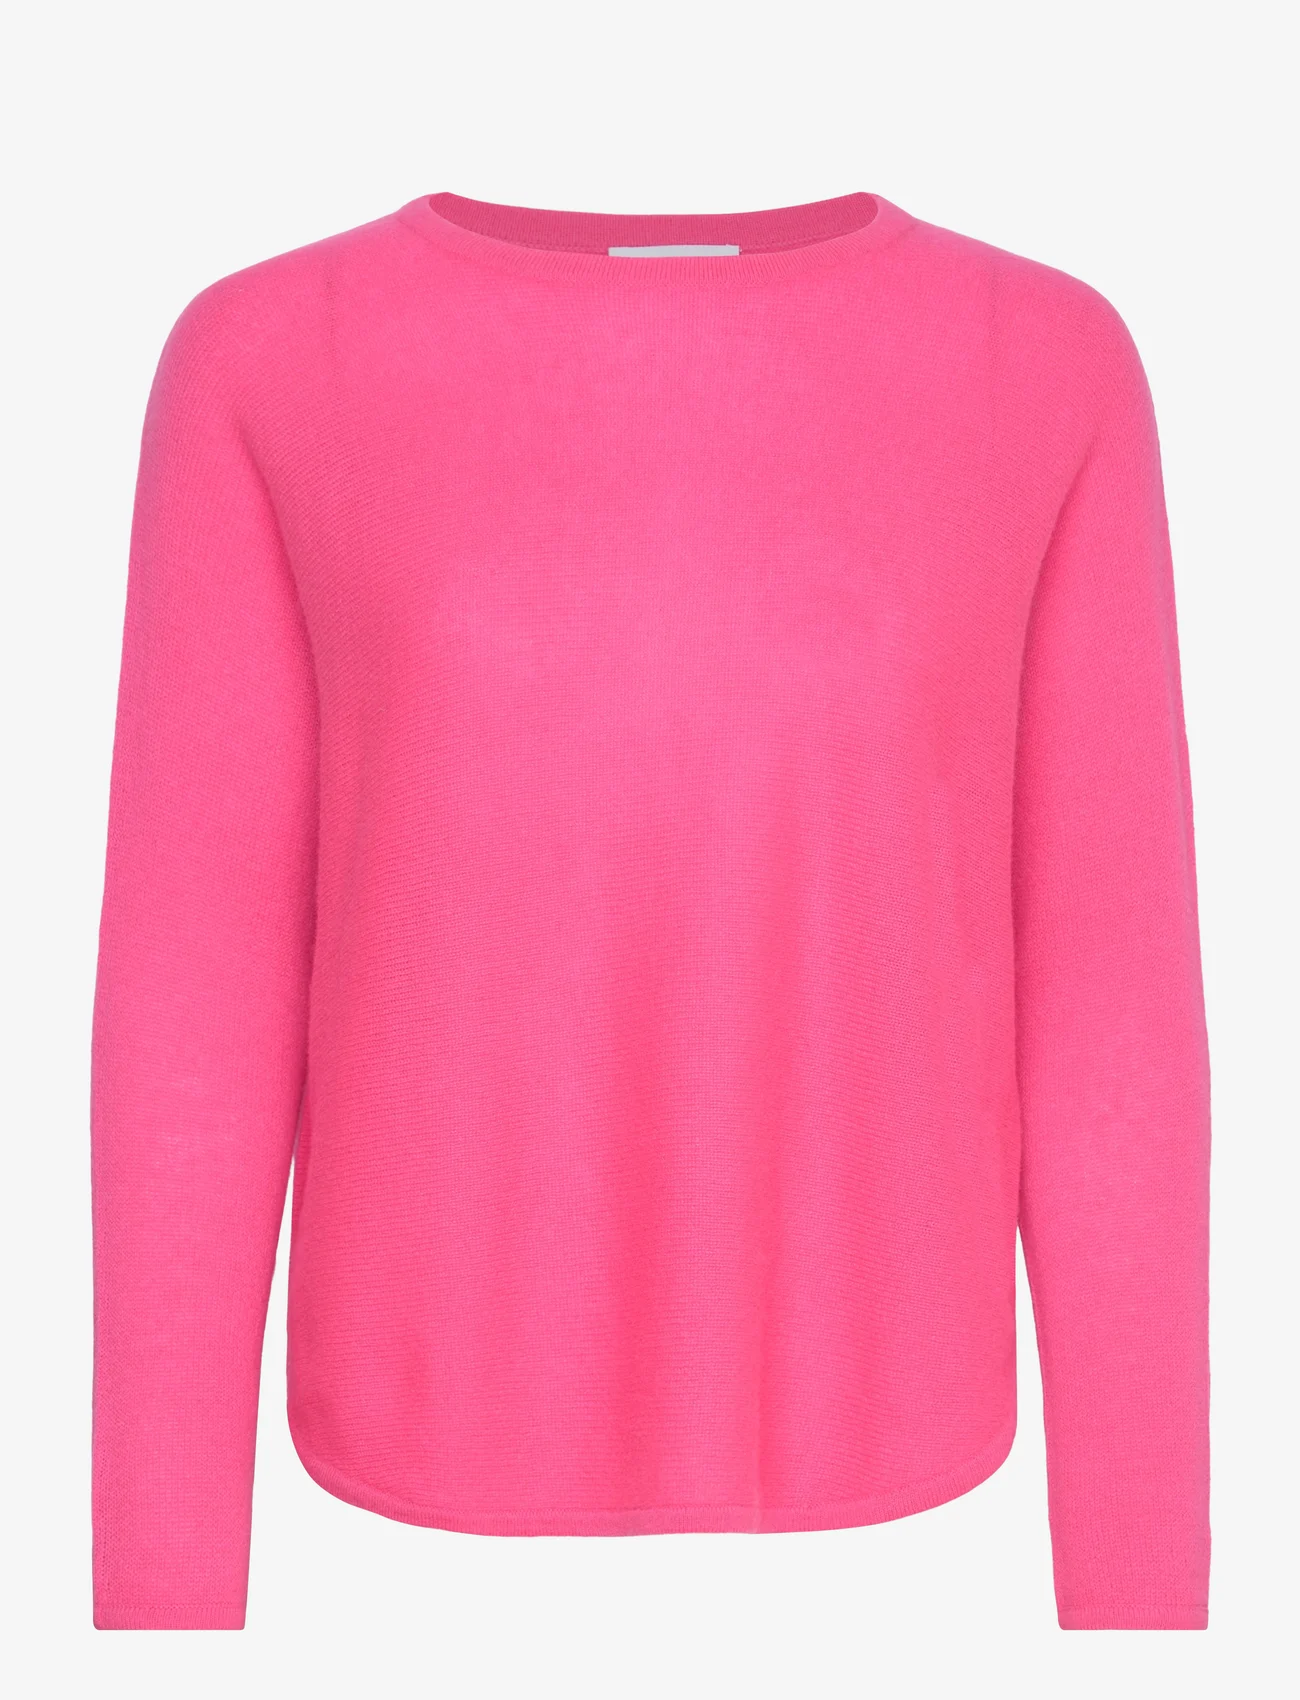 Davida Cashmere - Curved Sweater Loose Tension - pullover - candy pink - 0